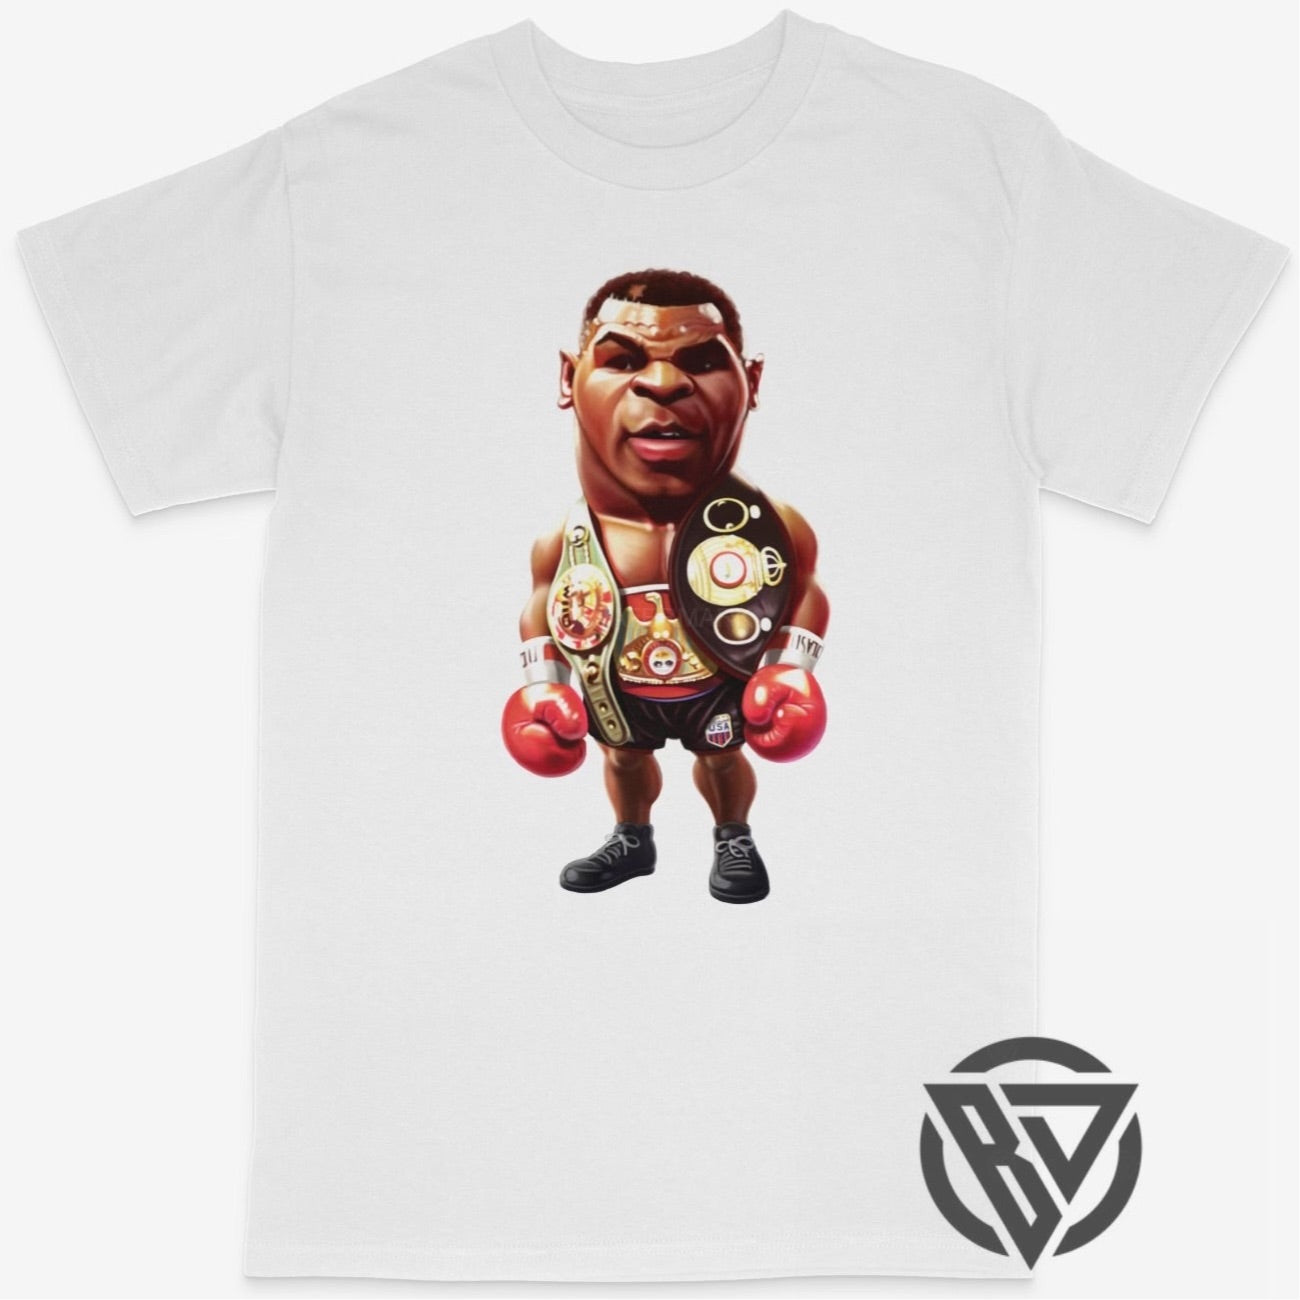 Mike Tyson Tee Shirt Boxing Fighter (BF)